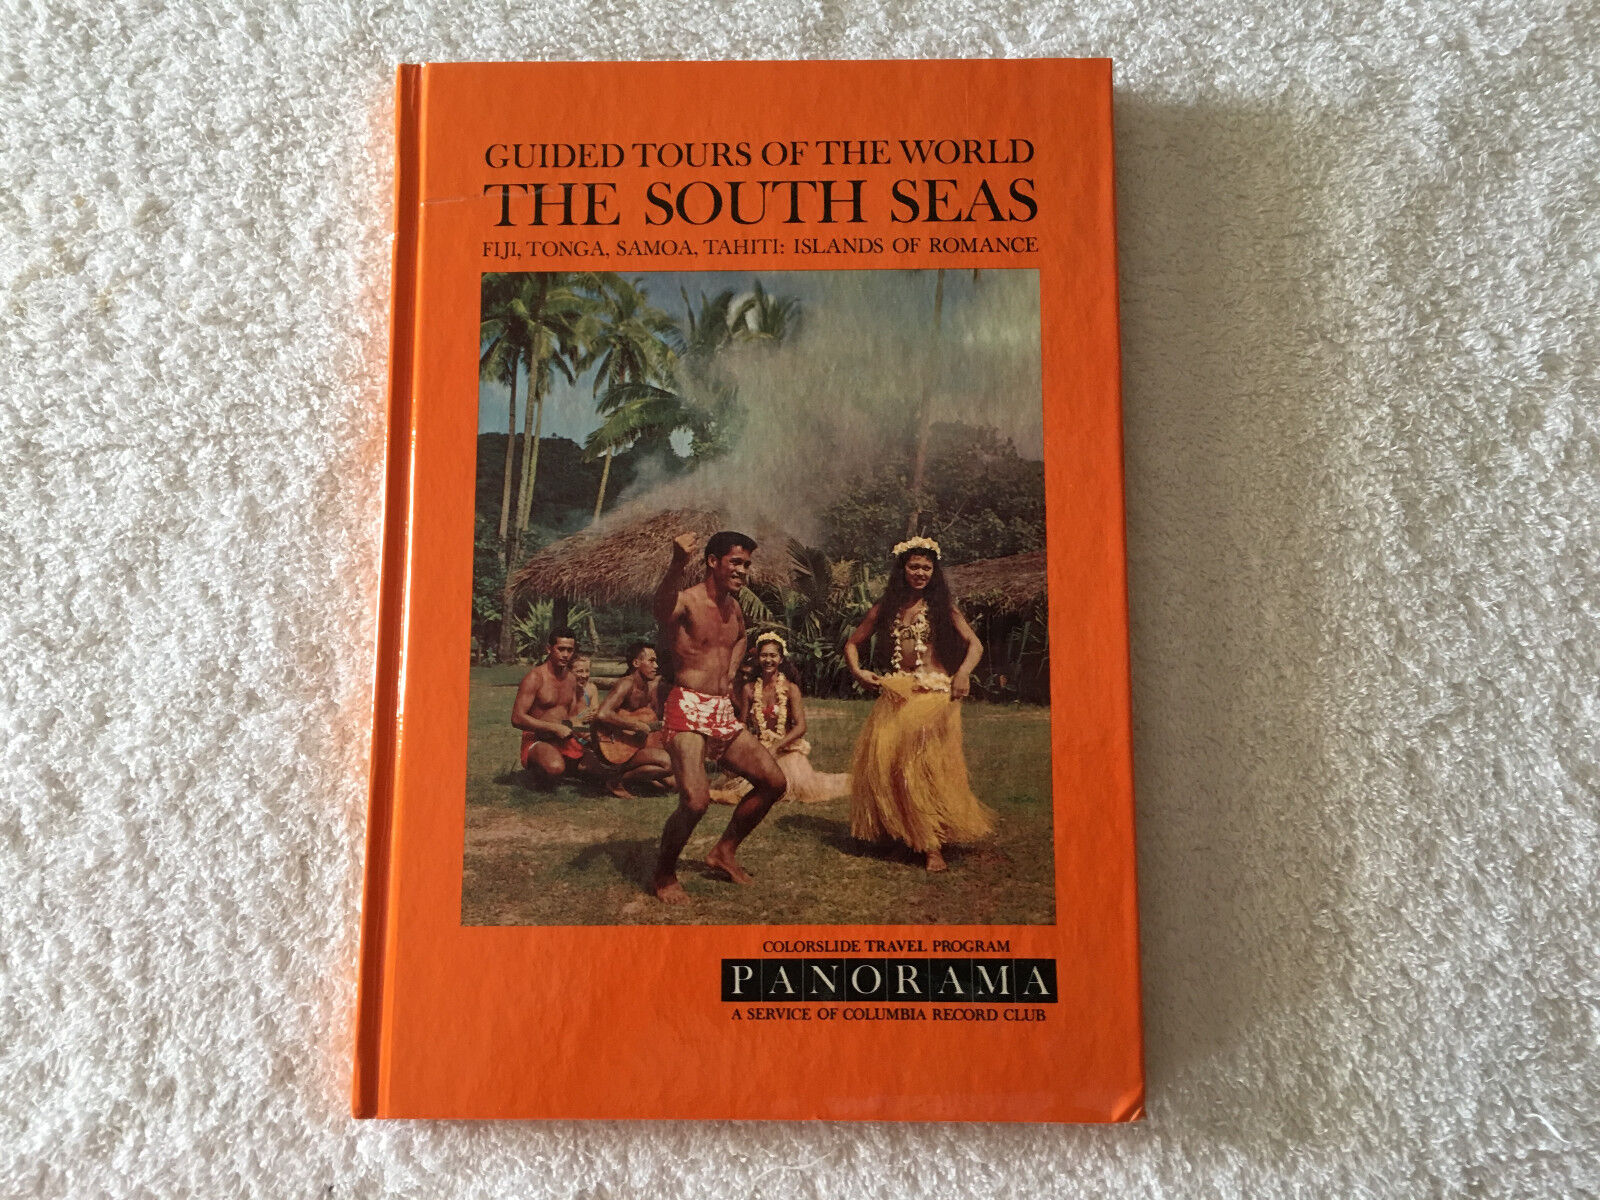 The South Seas Panorama Guided Tour Book / Slides / Record 1961 George Sanders